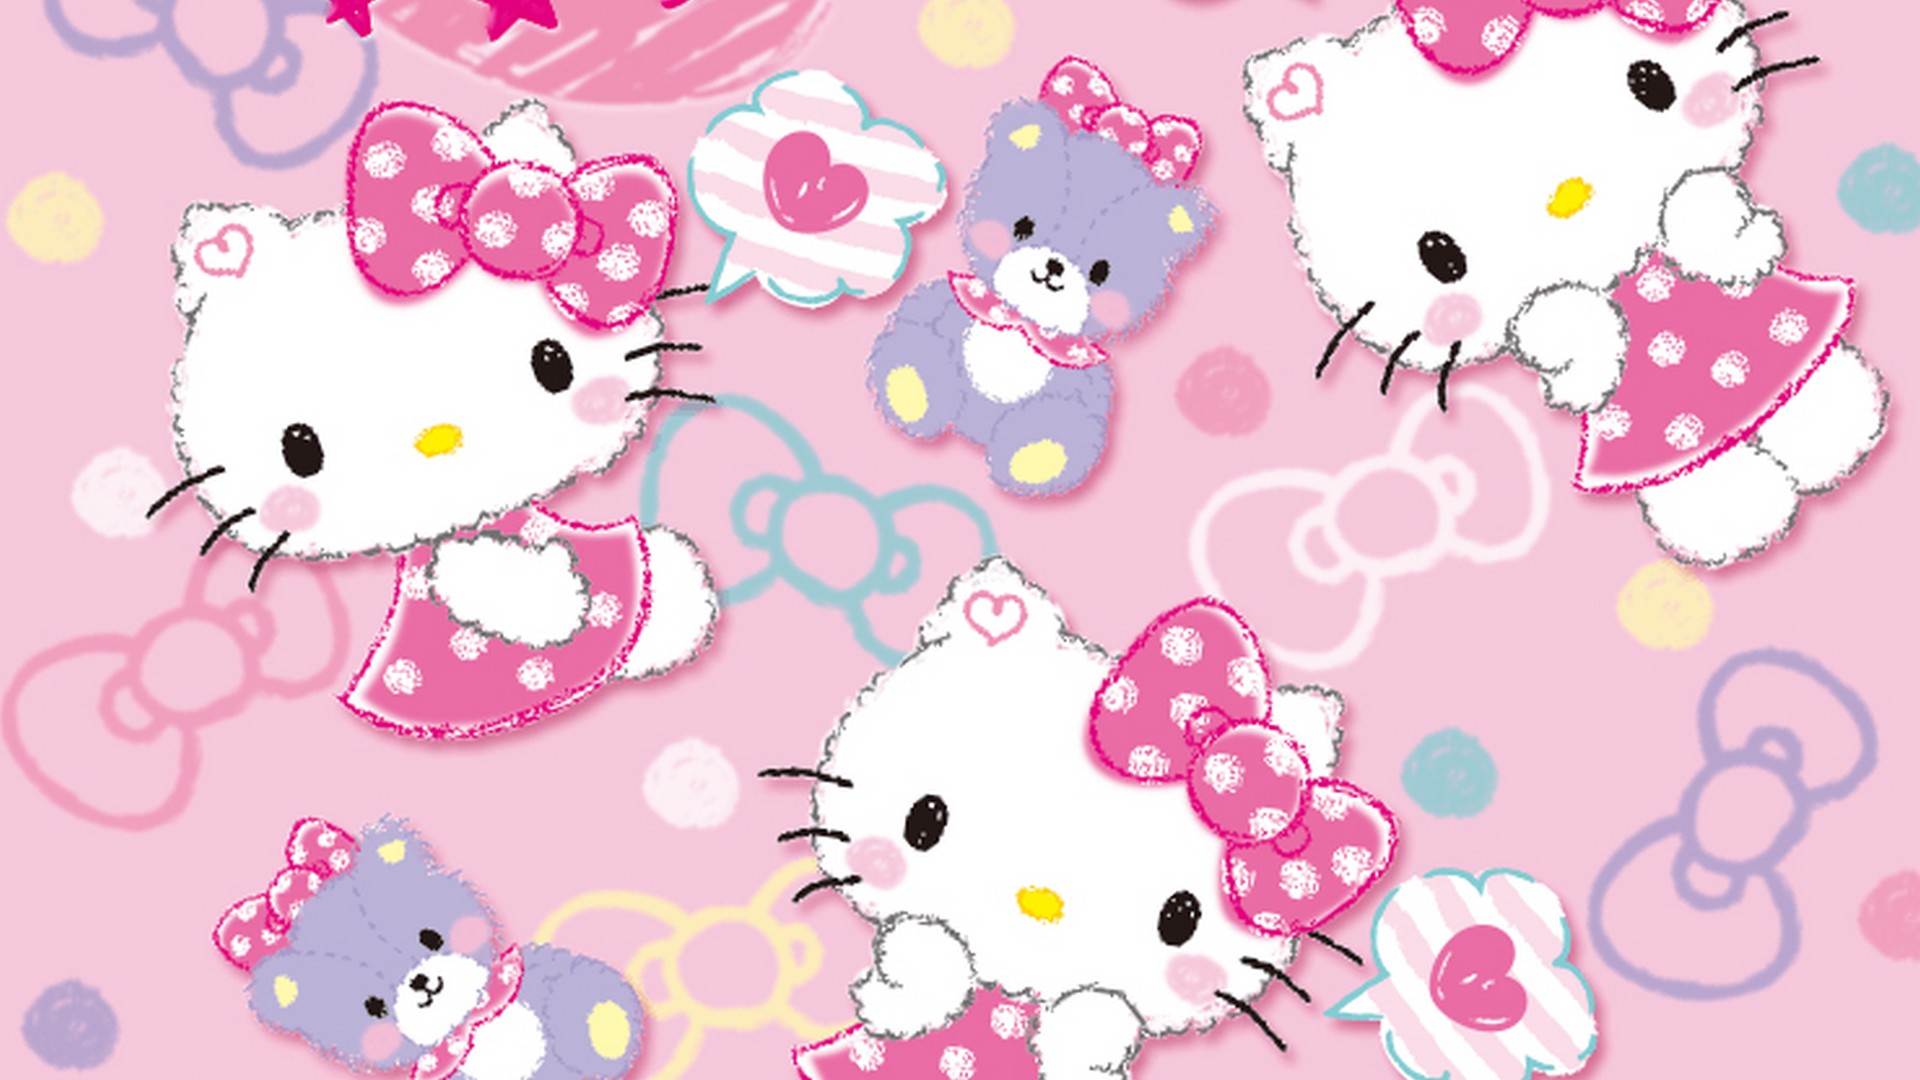 Hello Kitty Characters Background Wallpaper HD With Resolution 1920X1080 pixel. You can make this wallpaper for your Desktop Computer Backgrounds, Mac Wallpapers, Android Lock screen or iPhone Screensavers